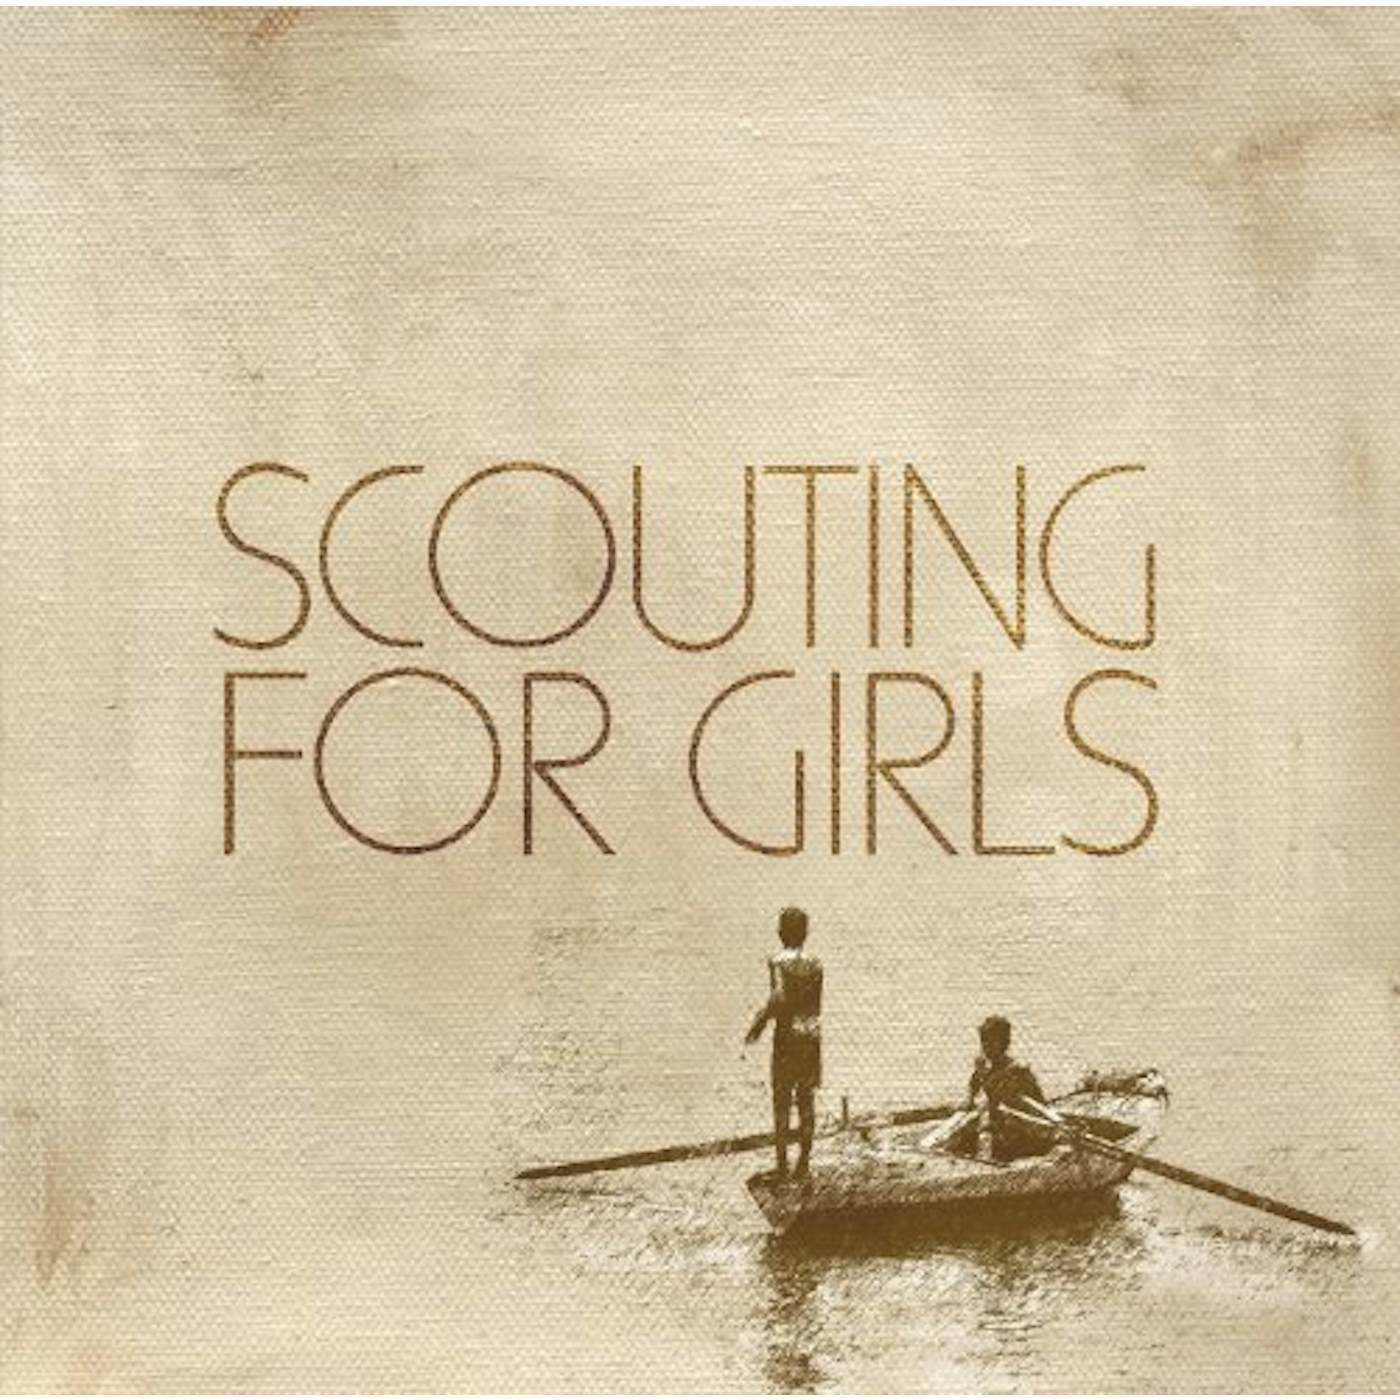 Scouting For Girls Vinyl Record